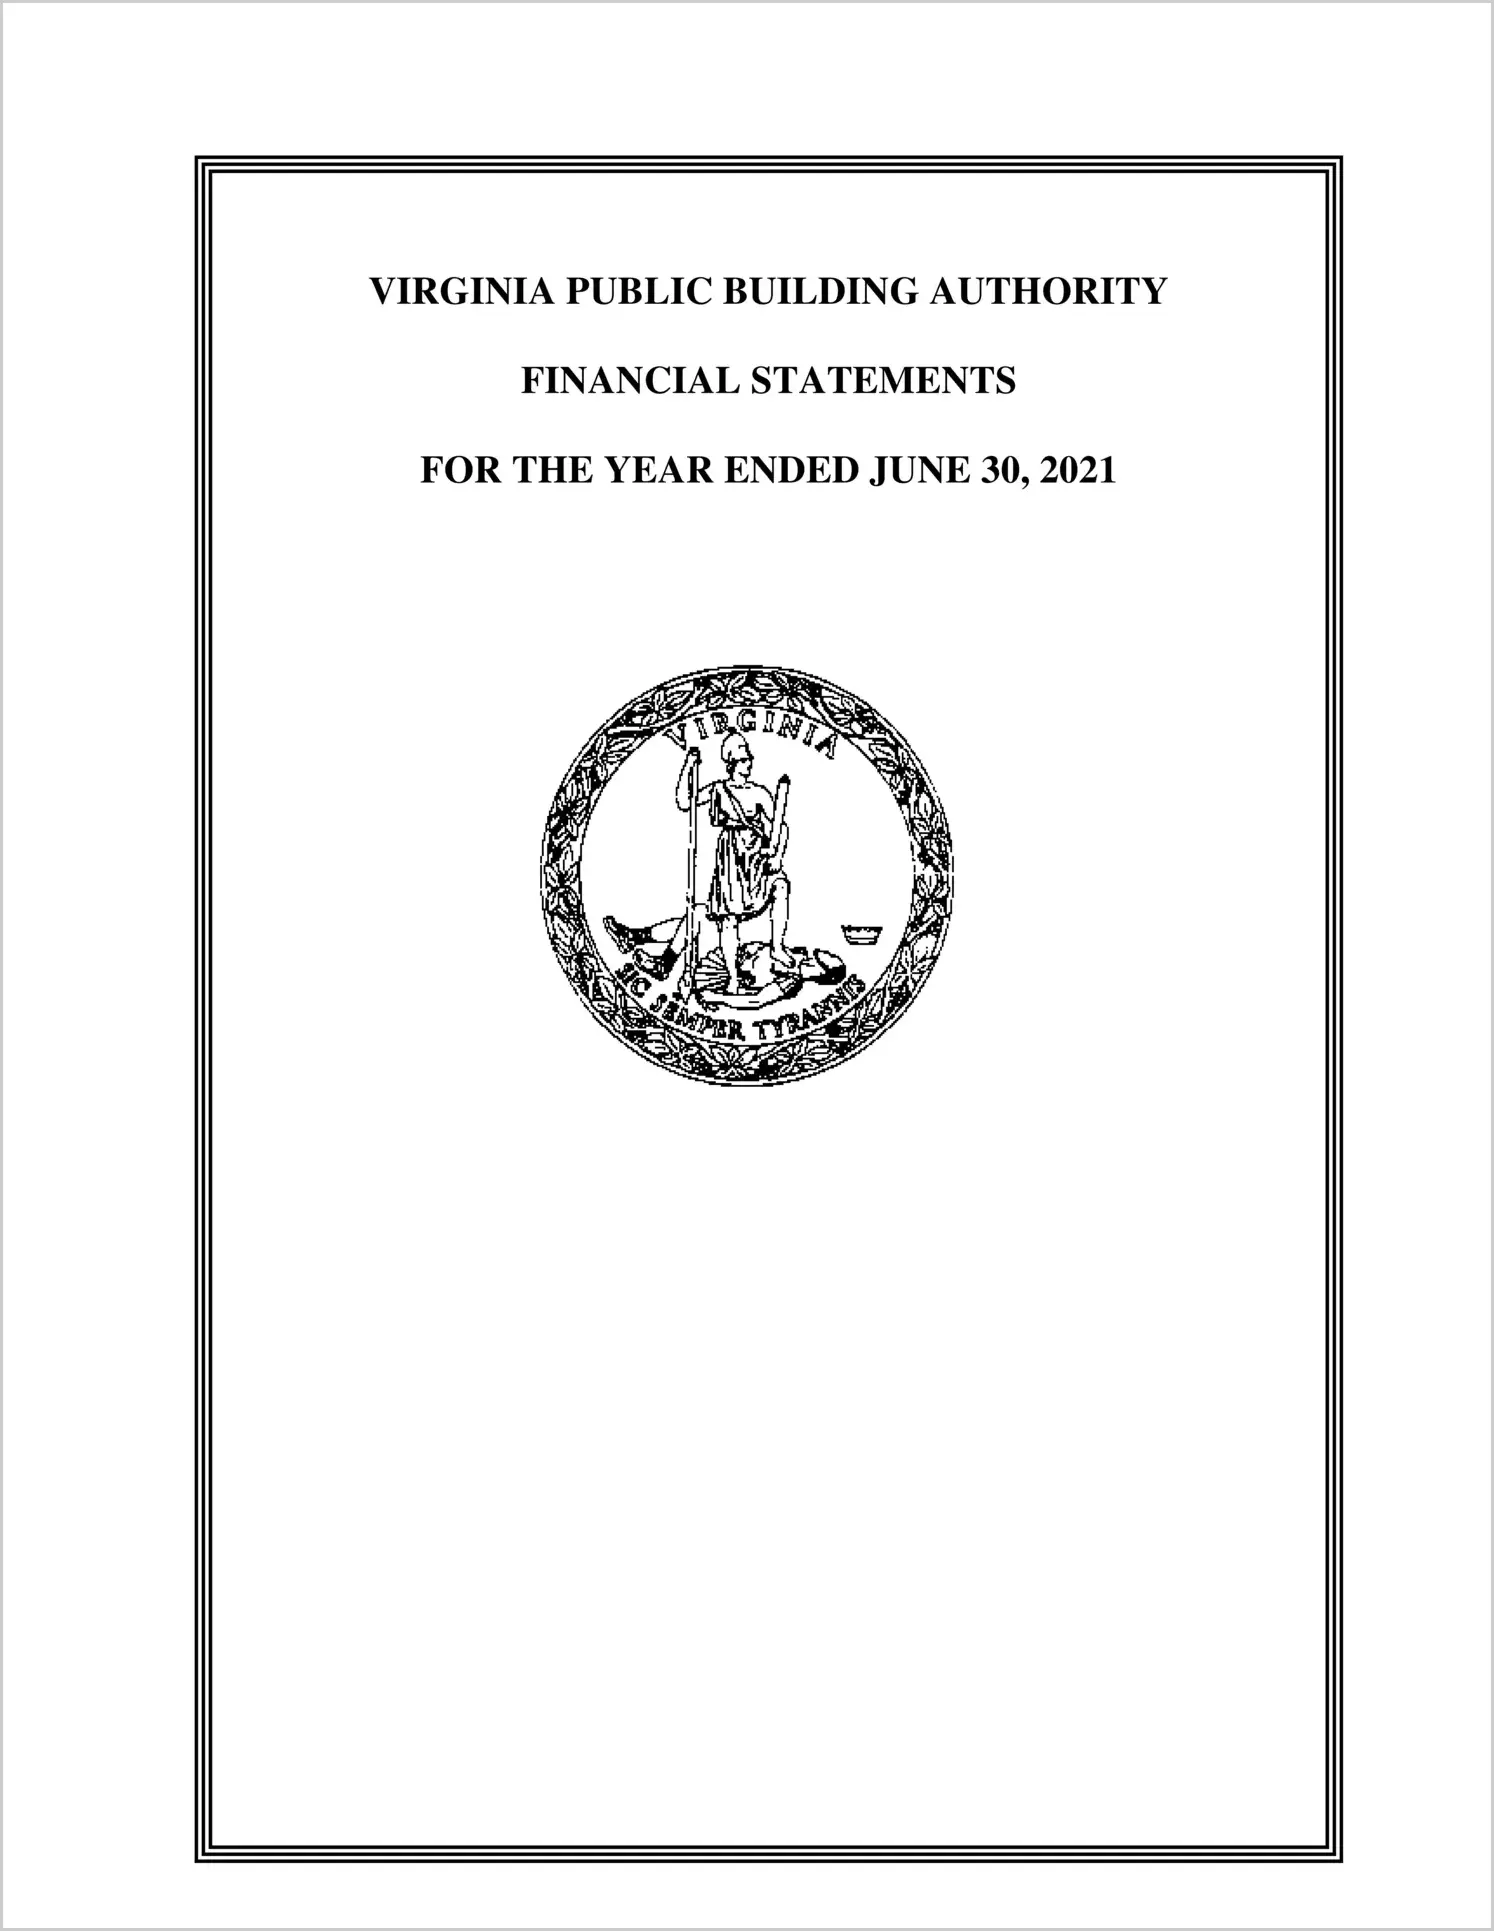 Virginia Public Building Authority Financial Statements for the year ended June 30, 2021